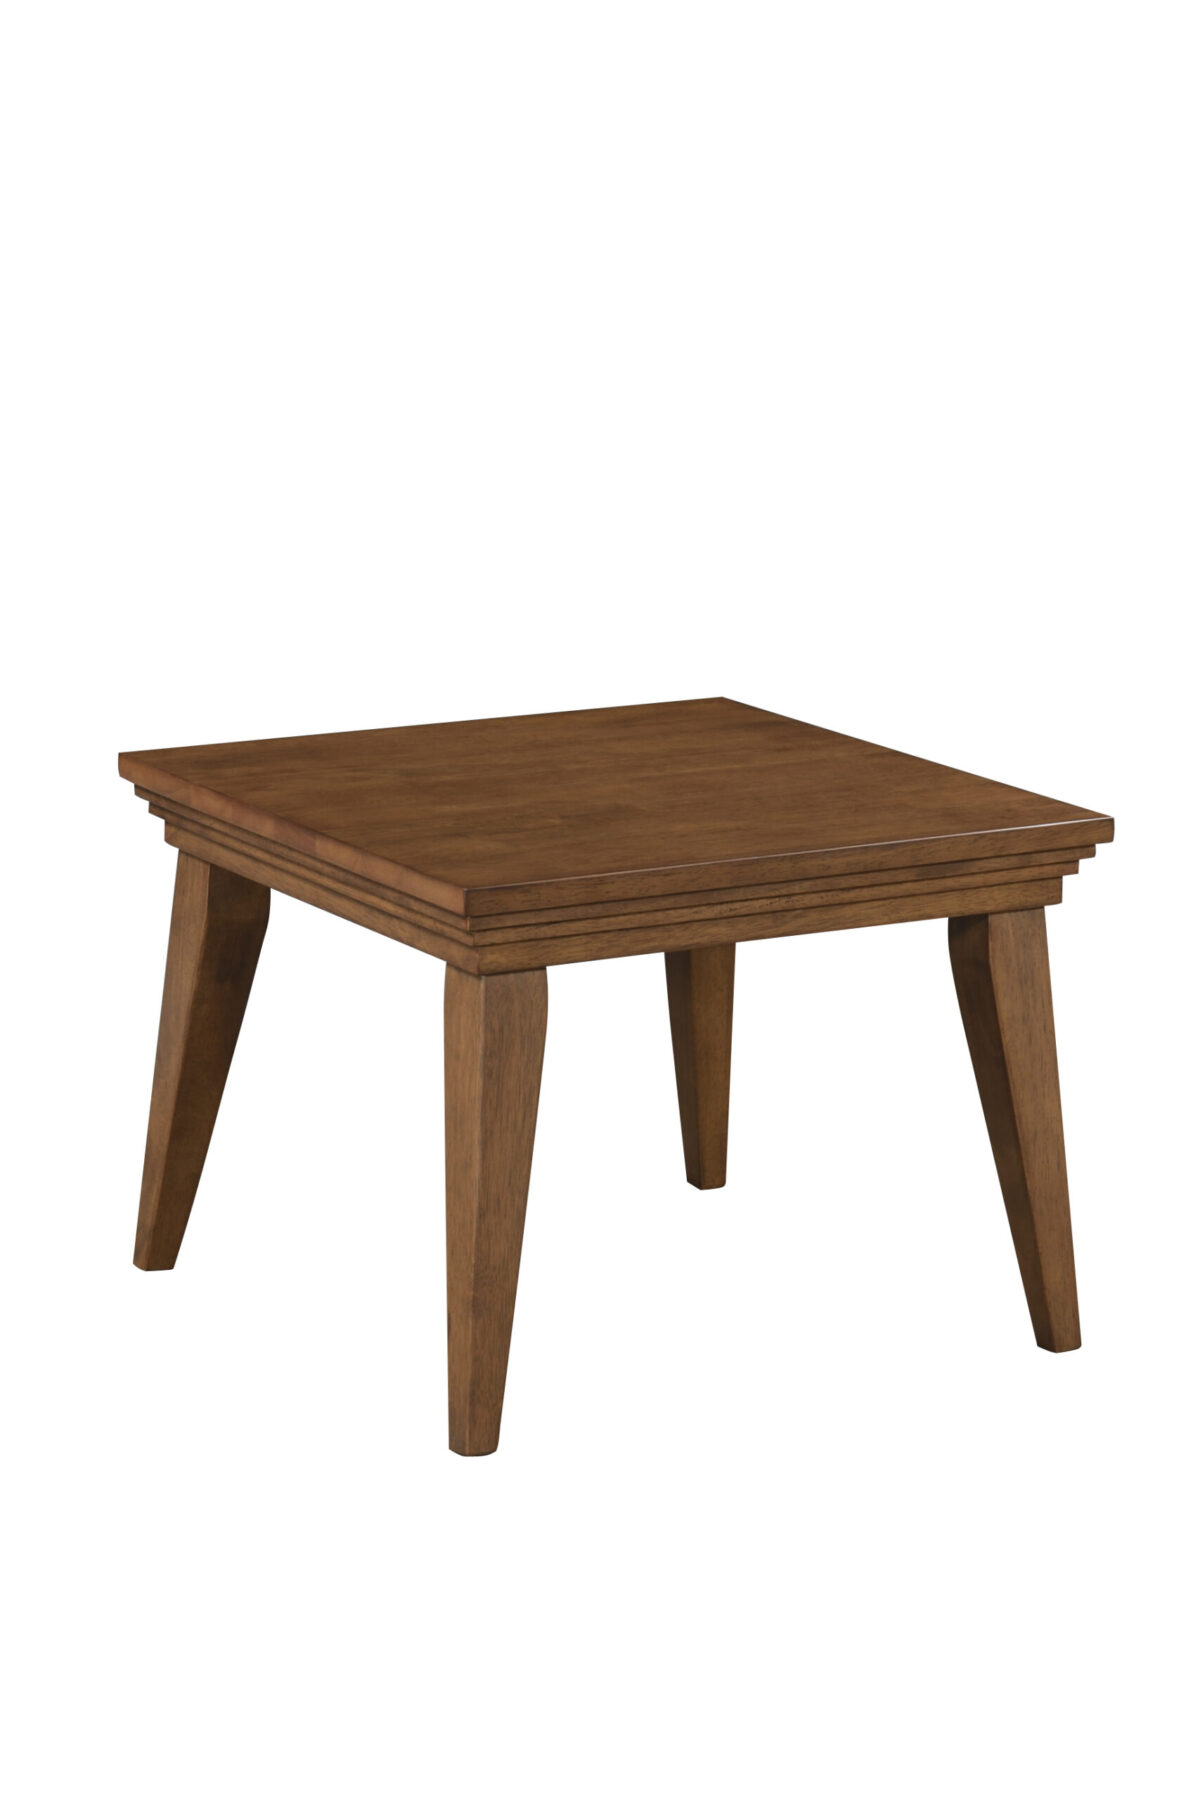 Cader Electromeubles - FP114 END TABLE scaled